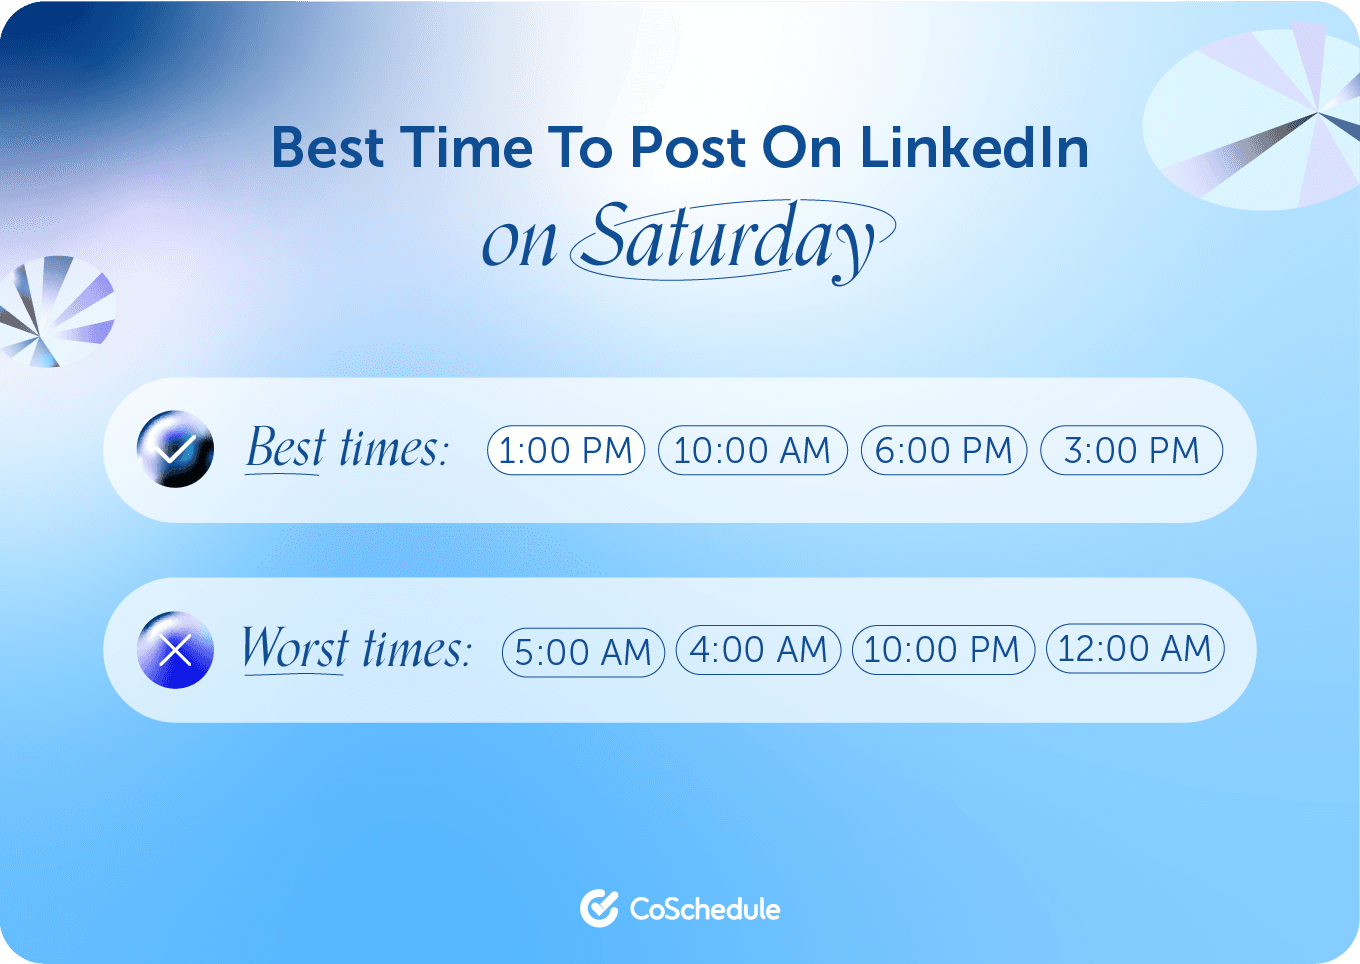 CoSchedule graphic on the best times to post on LinkedIn Saturday